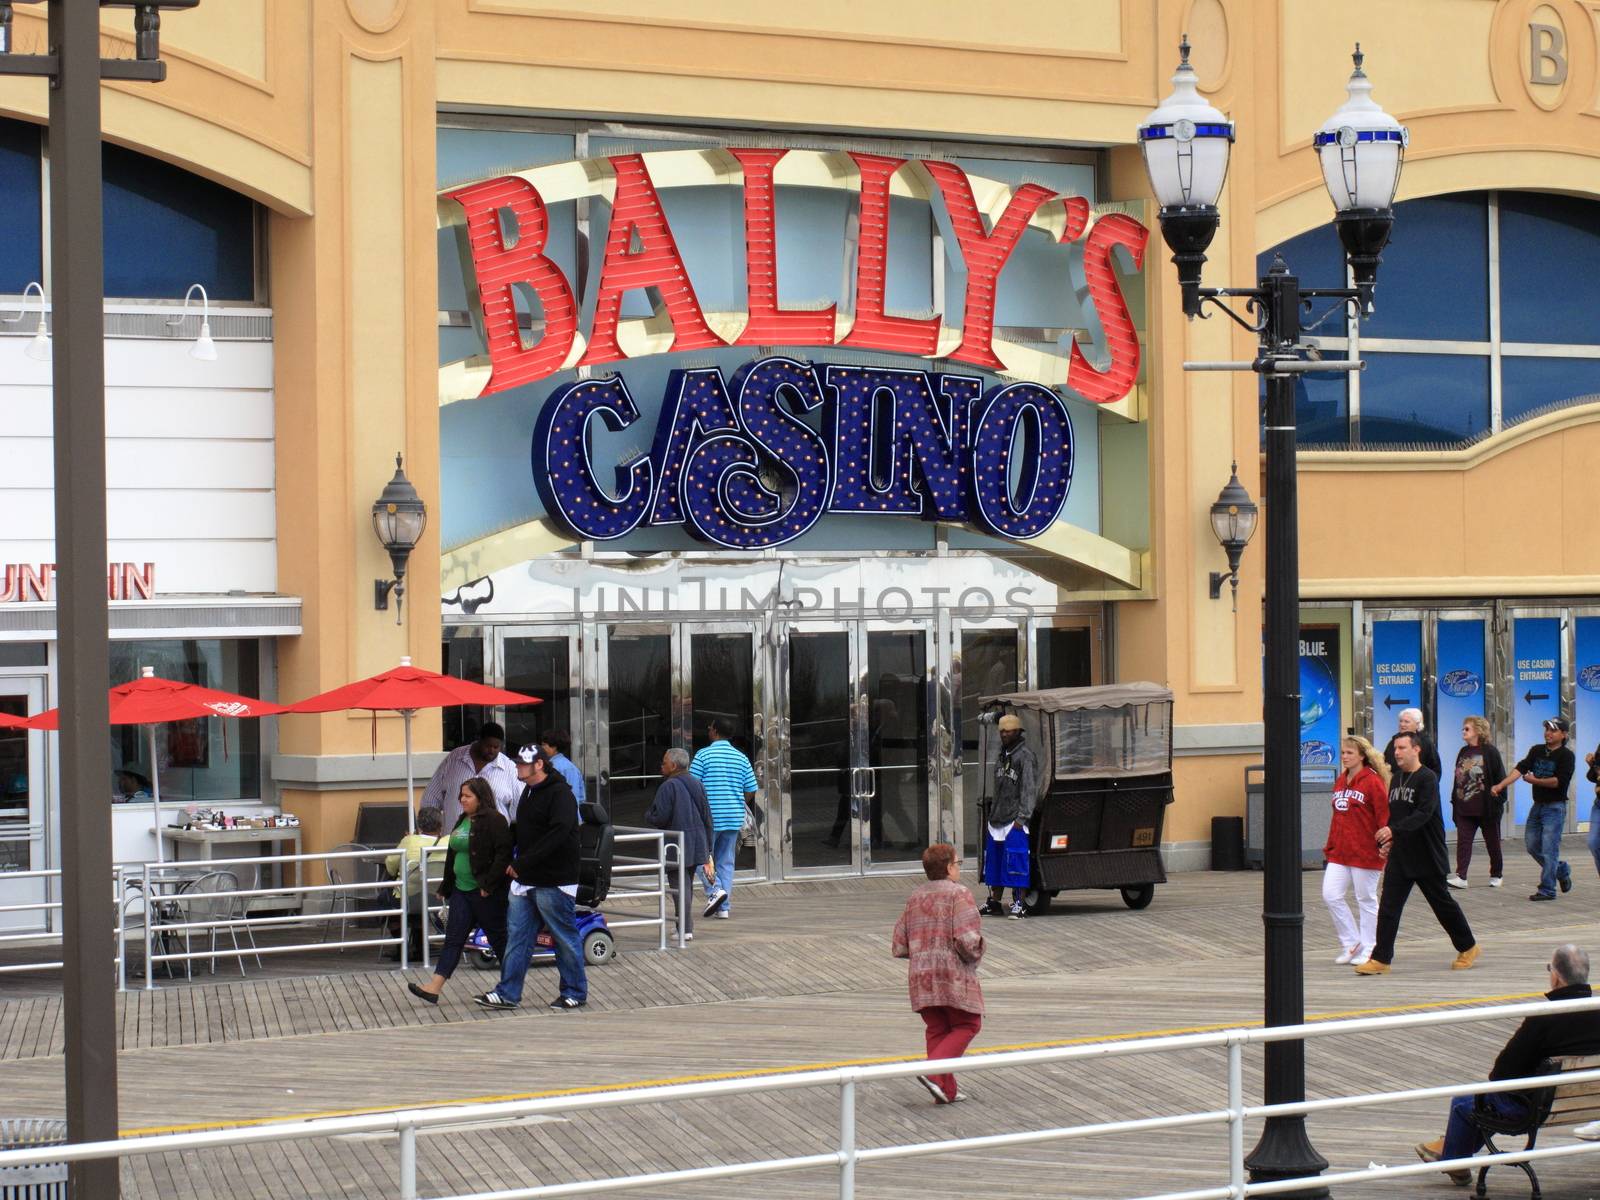 Bally's Hotel in Atlantic City by Ffooter